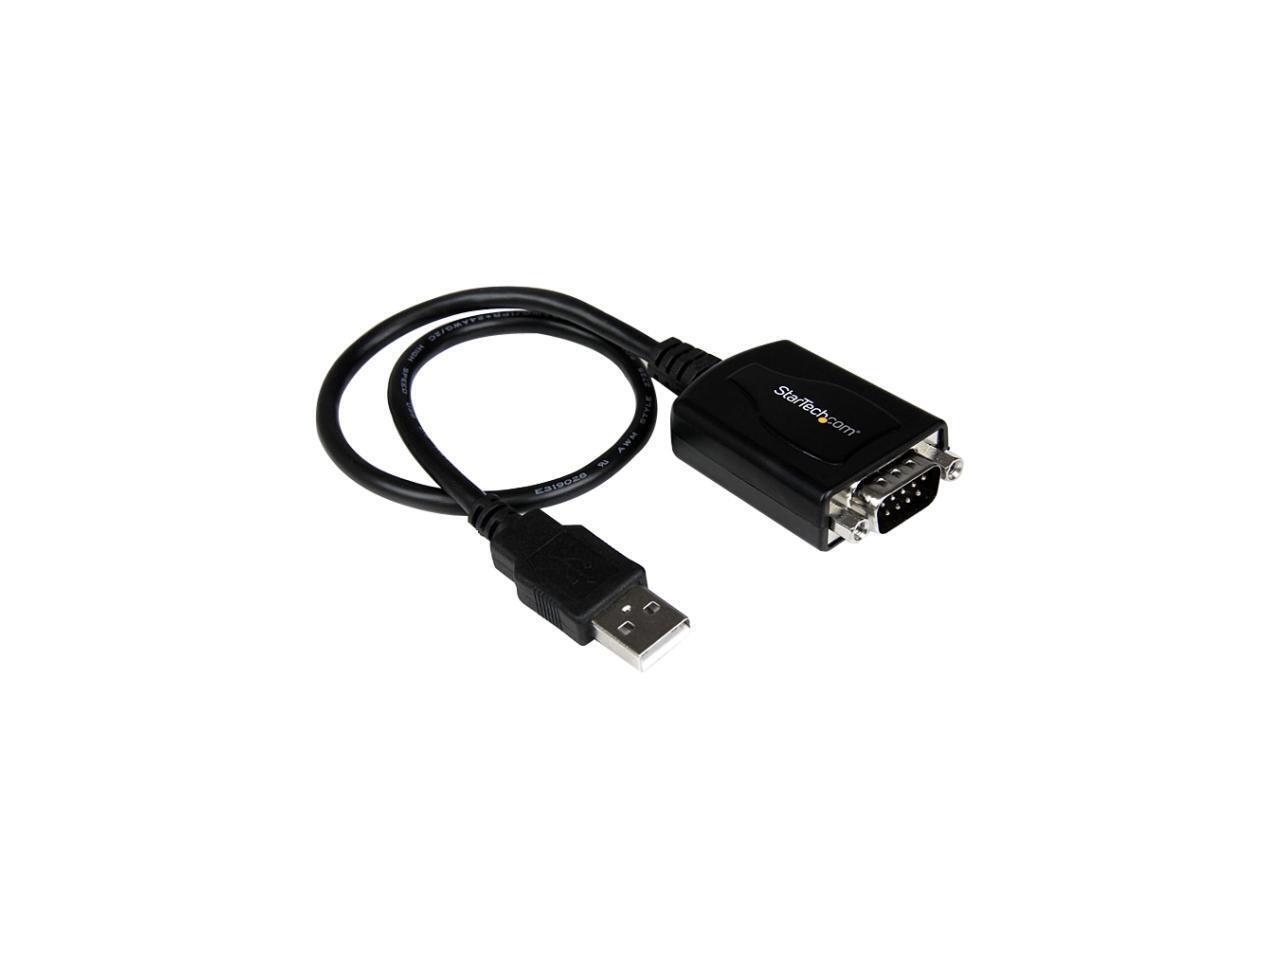 StarTech.com Model ICUSB2321X Professional USB to RS-232 Serial Adapter